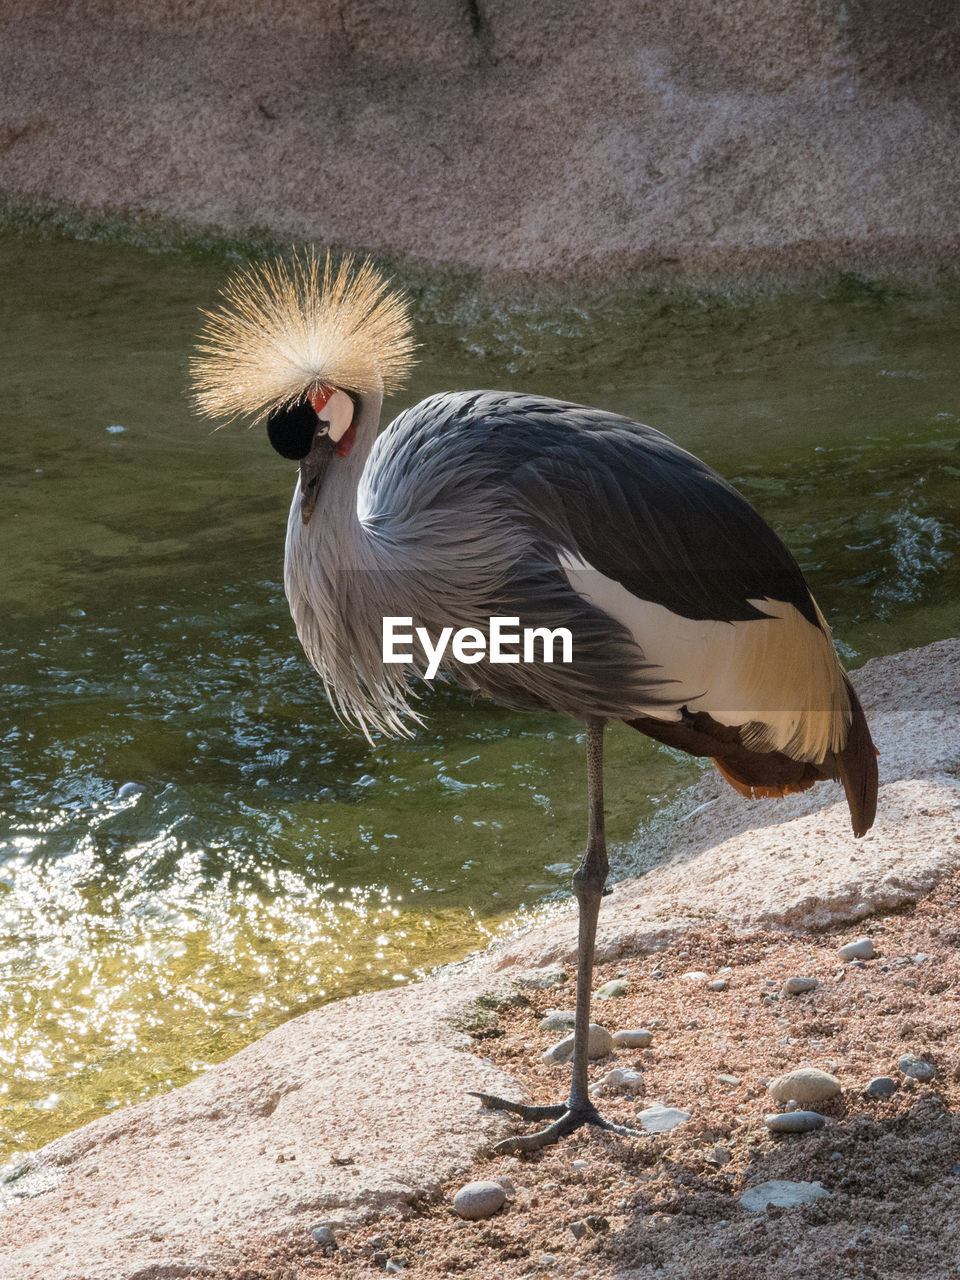 Profile image of a gray crowned crane, vertical image of an african bird